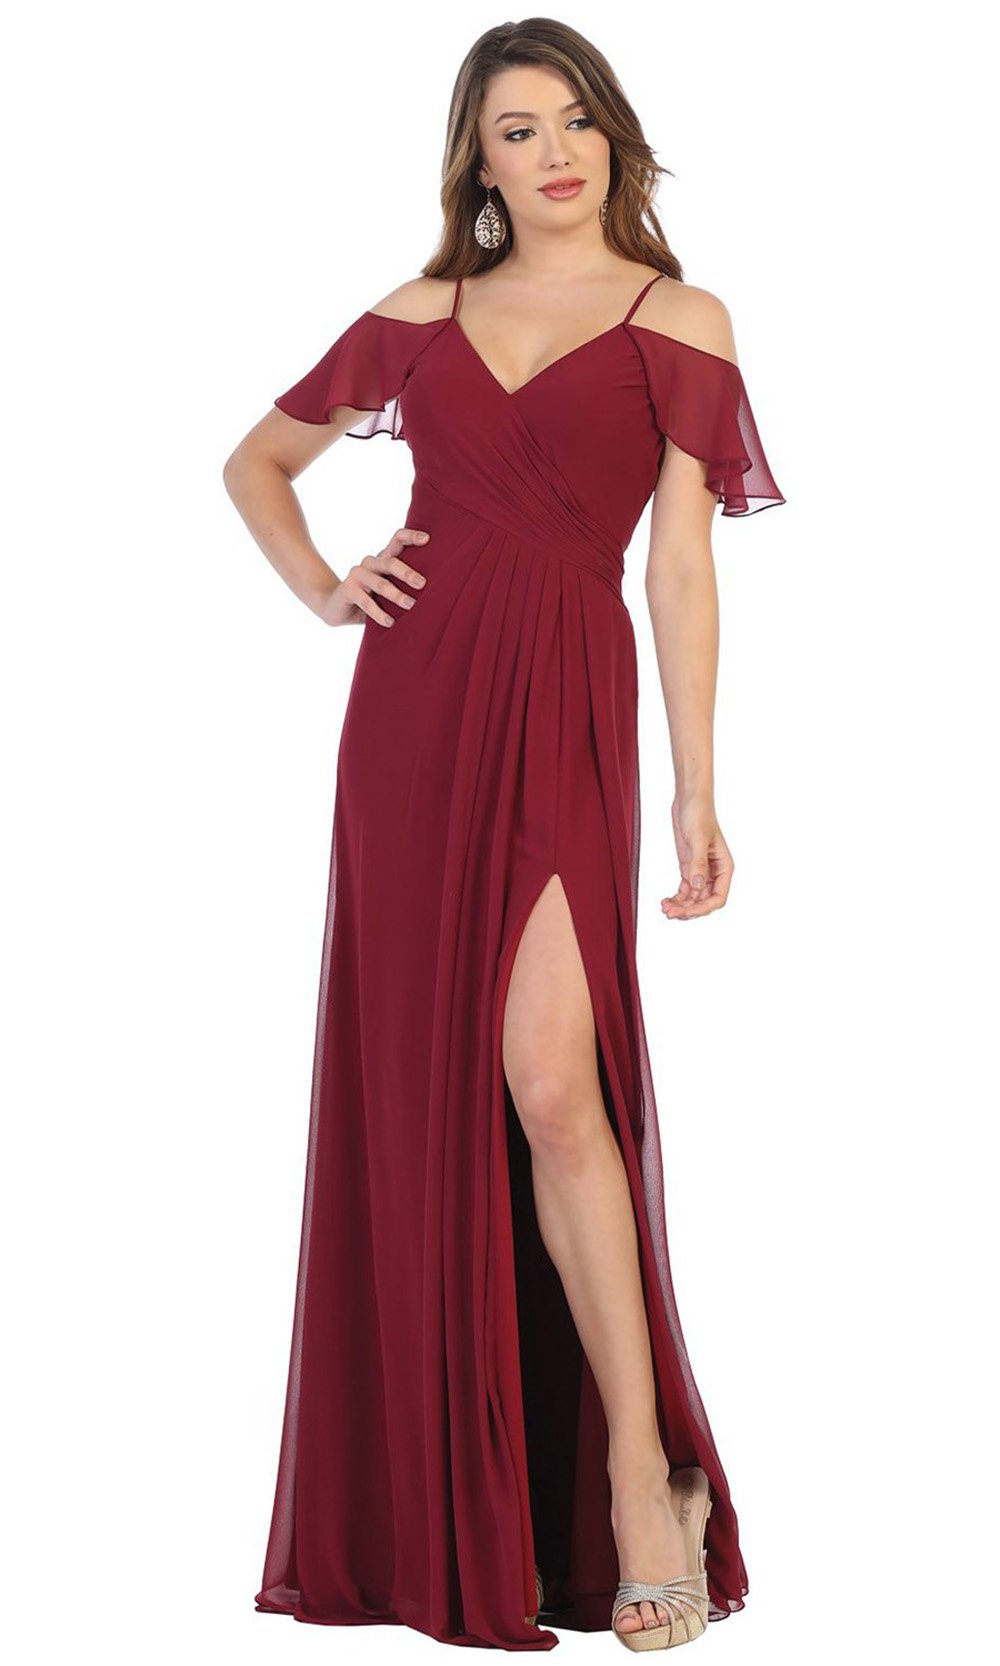 May Queen - Draped Cold Shoulder High Slit Dress MQ1732 In Red